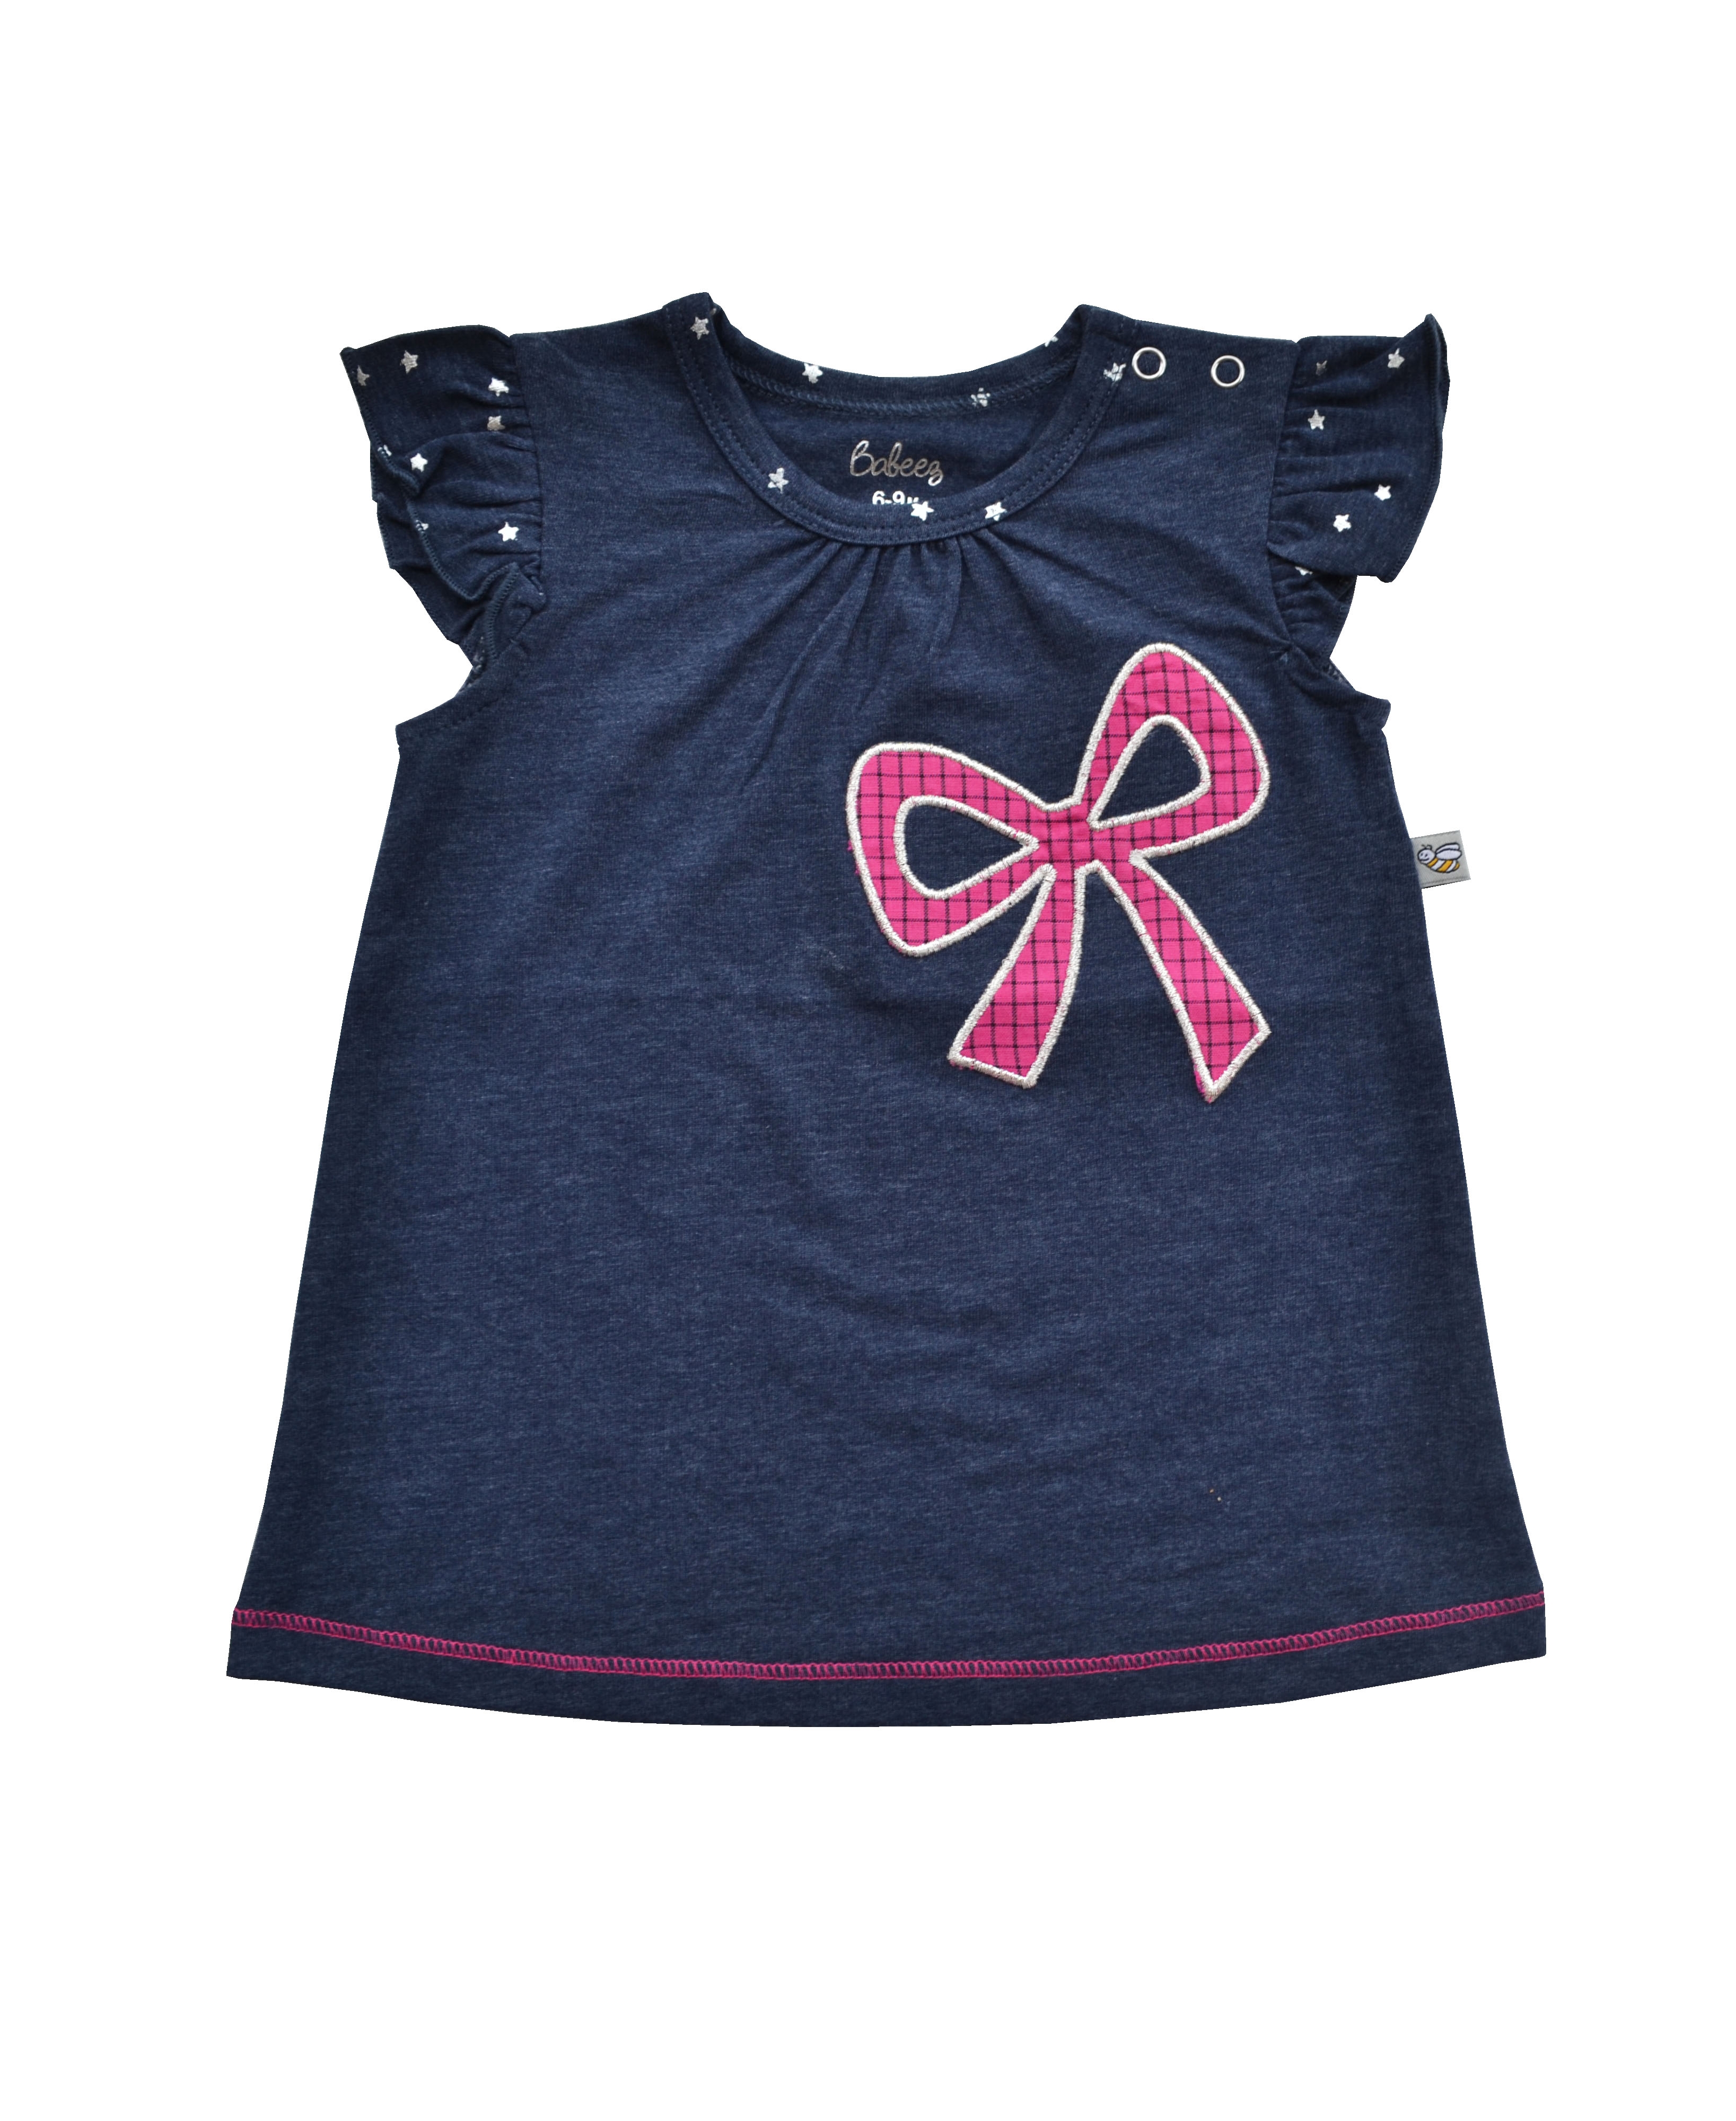 Denim Blue Top with Pink Bow Applique (95% Cotton 5% Elasthan Jersey)